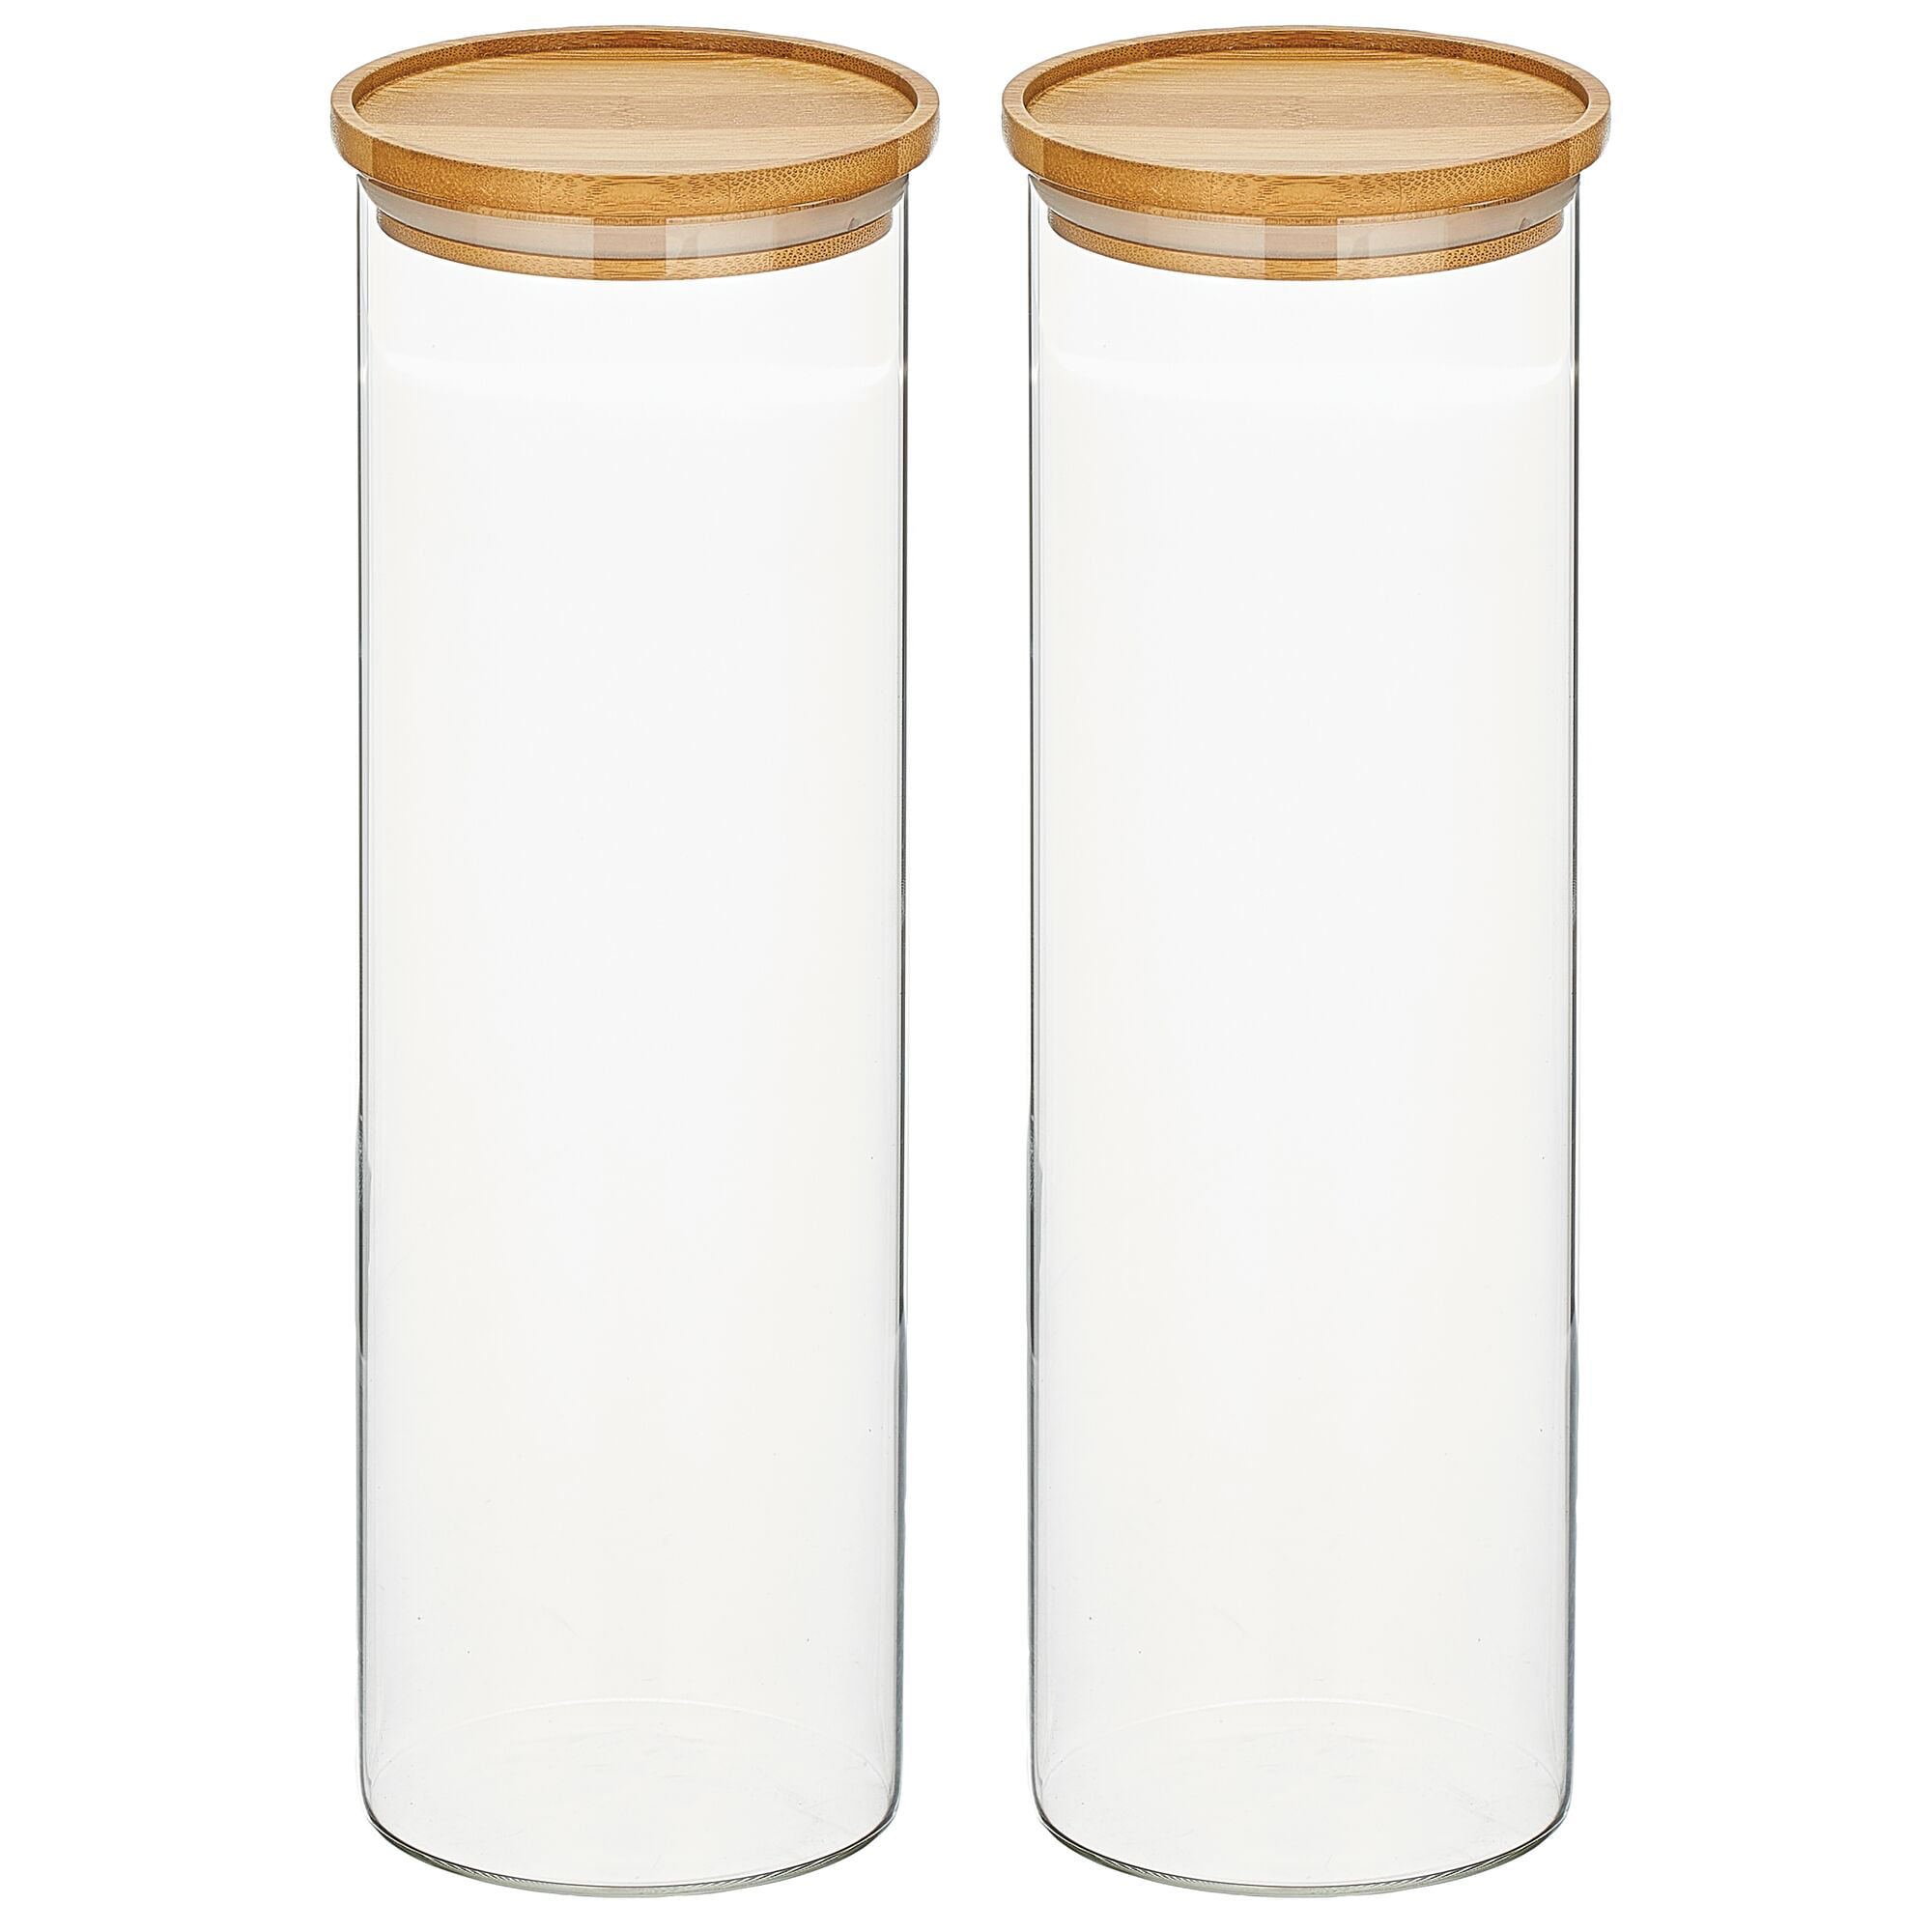 Refillable Bamboo Canister, Lotion Bar Storage